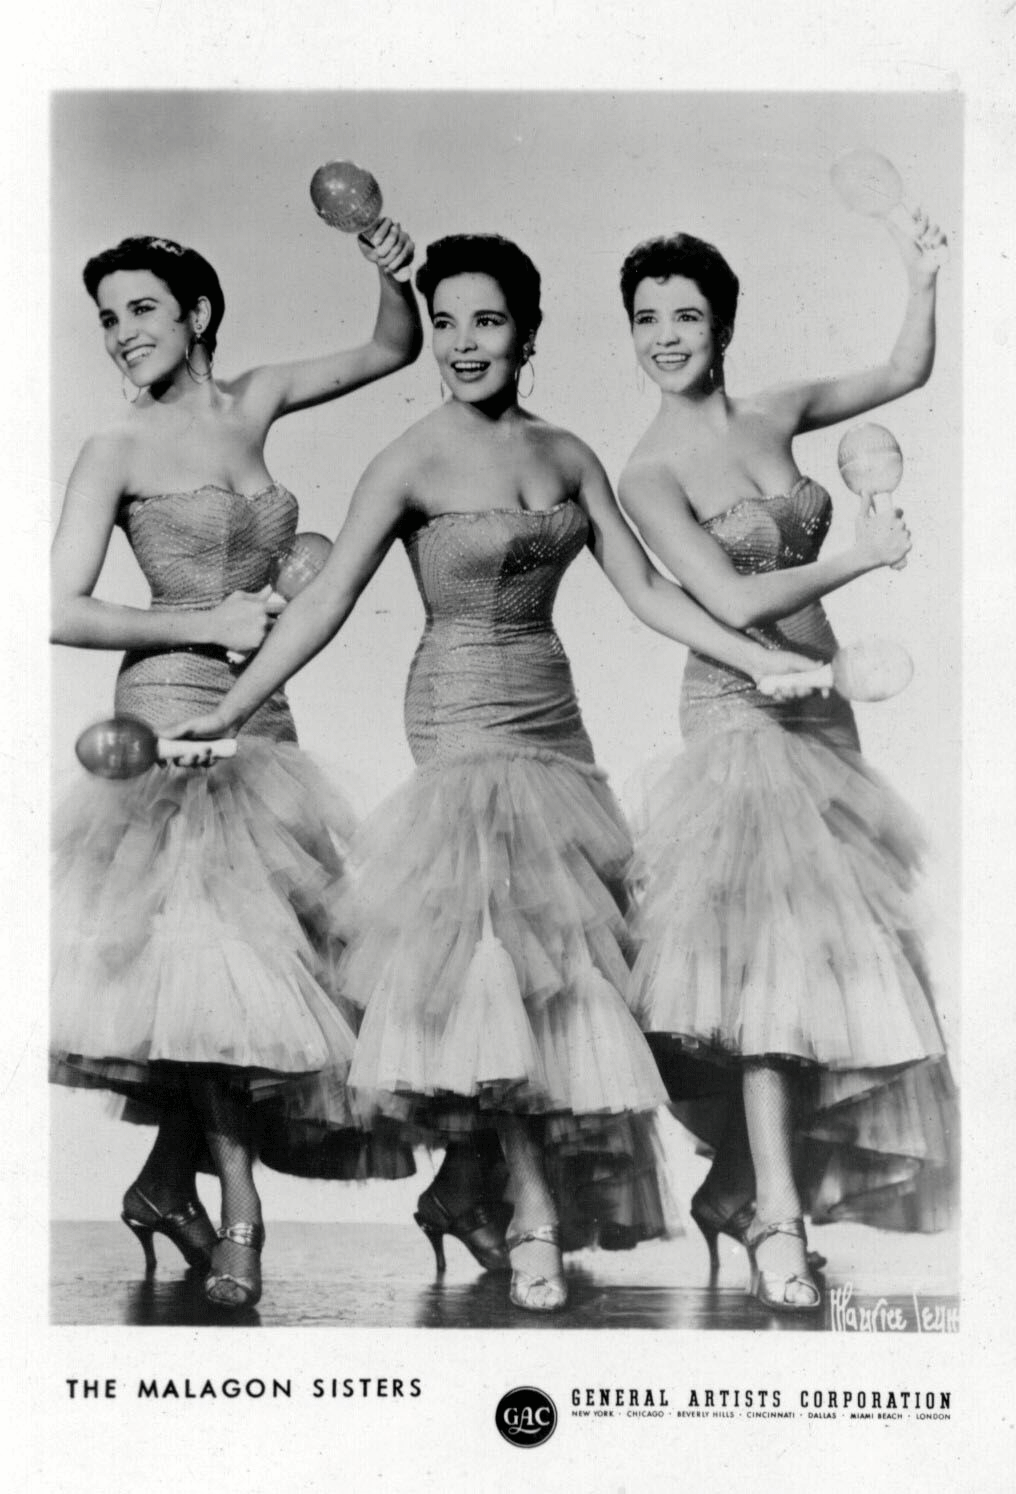 The Malagon Sisters, General Artists Corporation press photo, ca. 1955